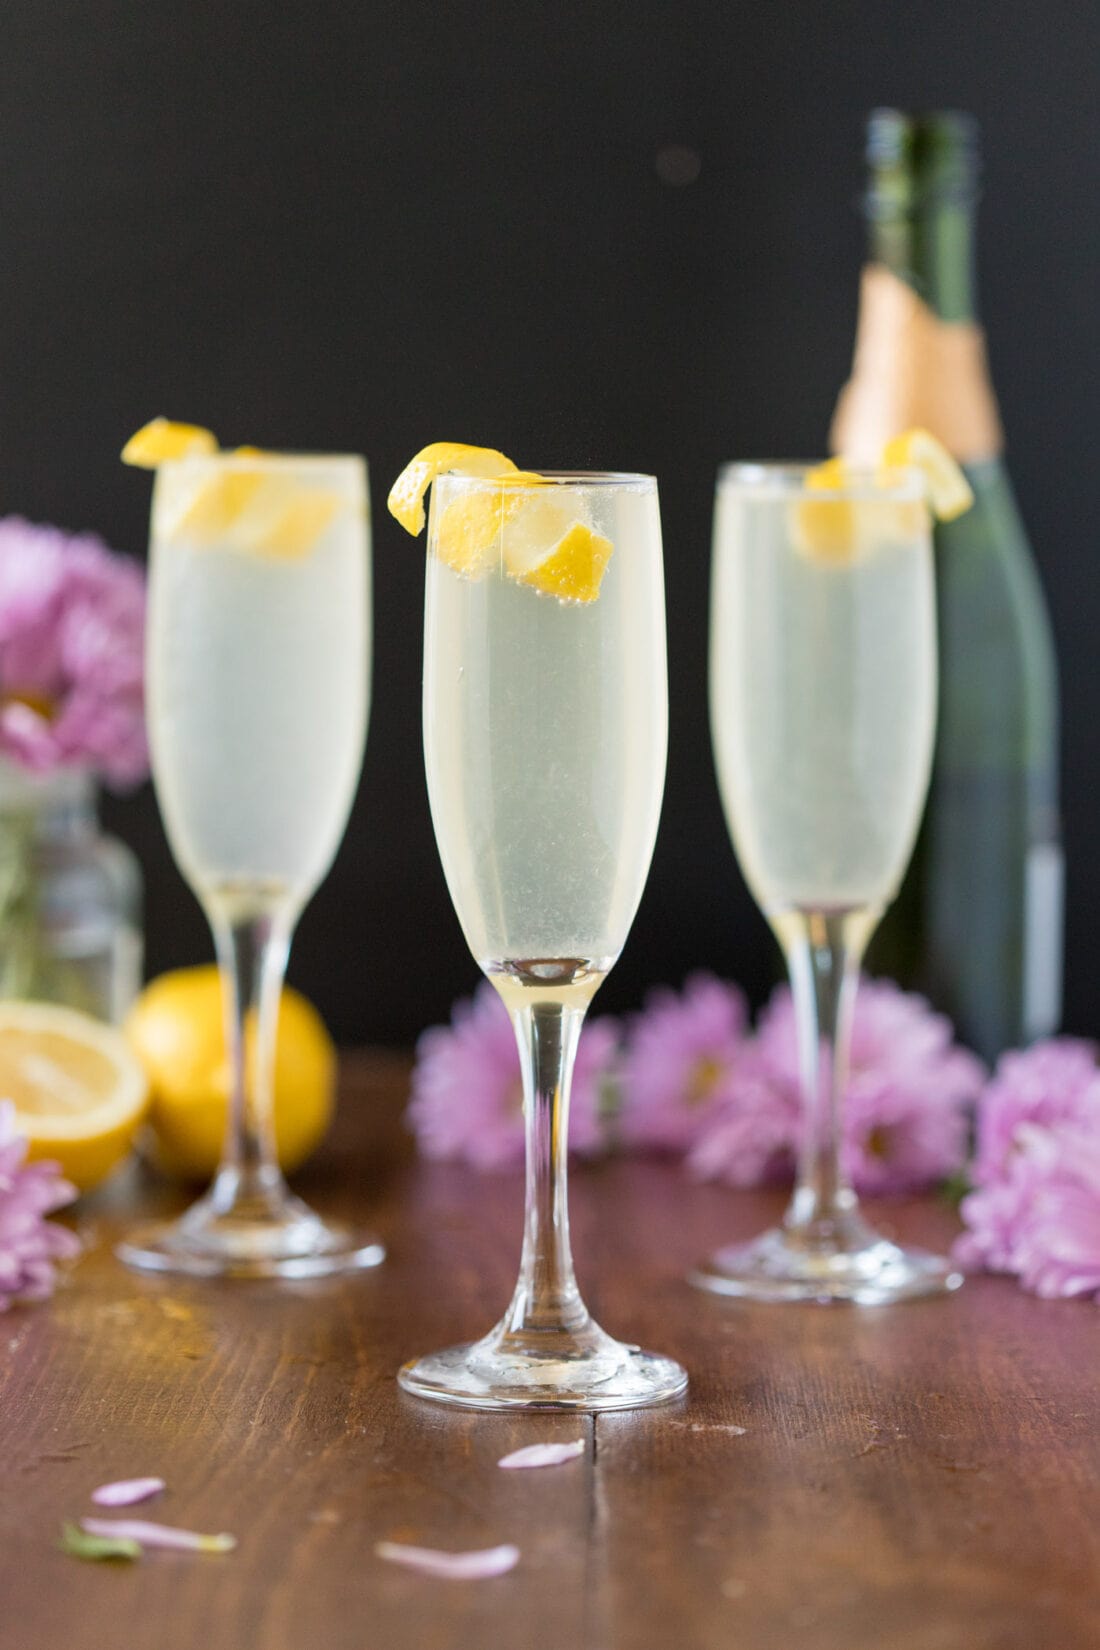 Three French 75 cocktails